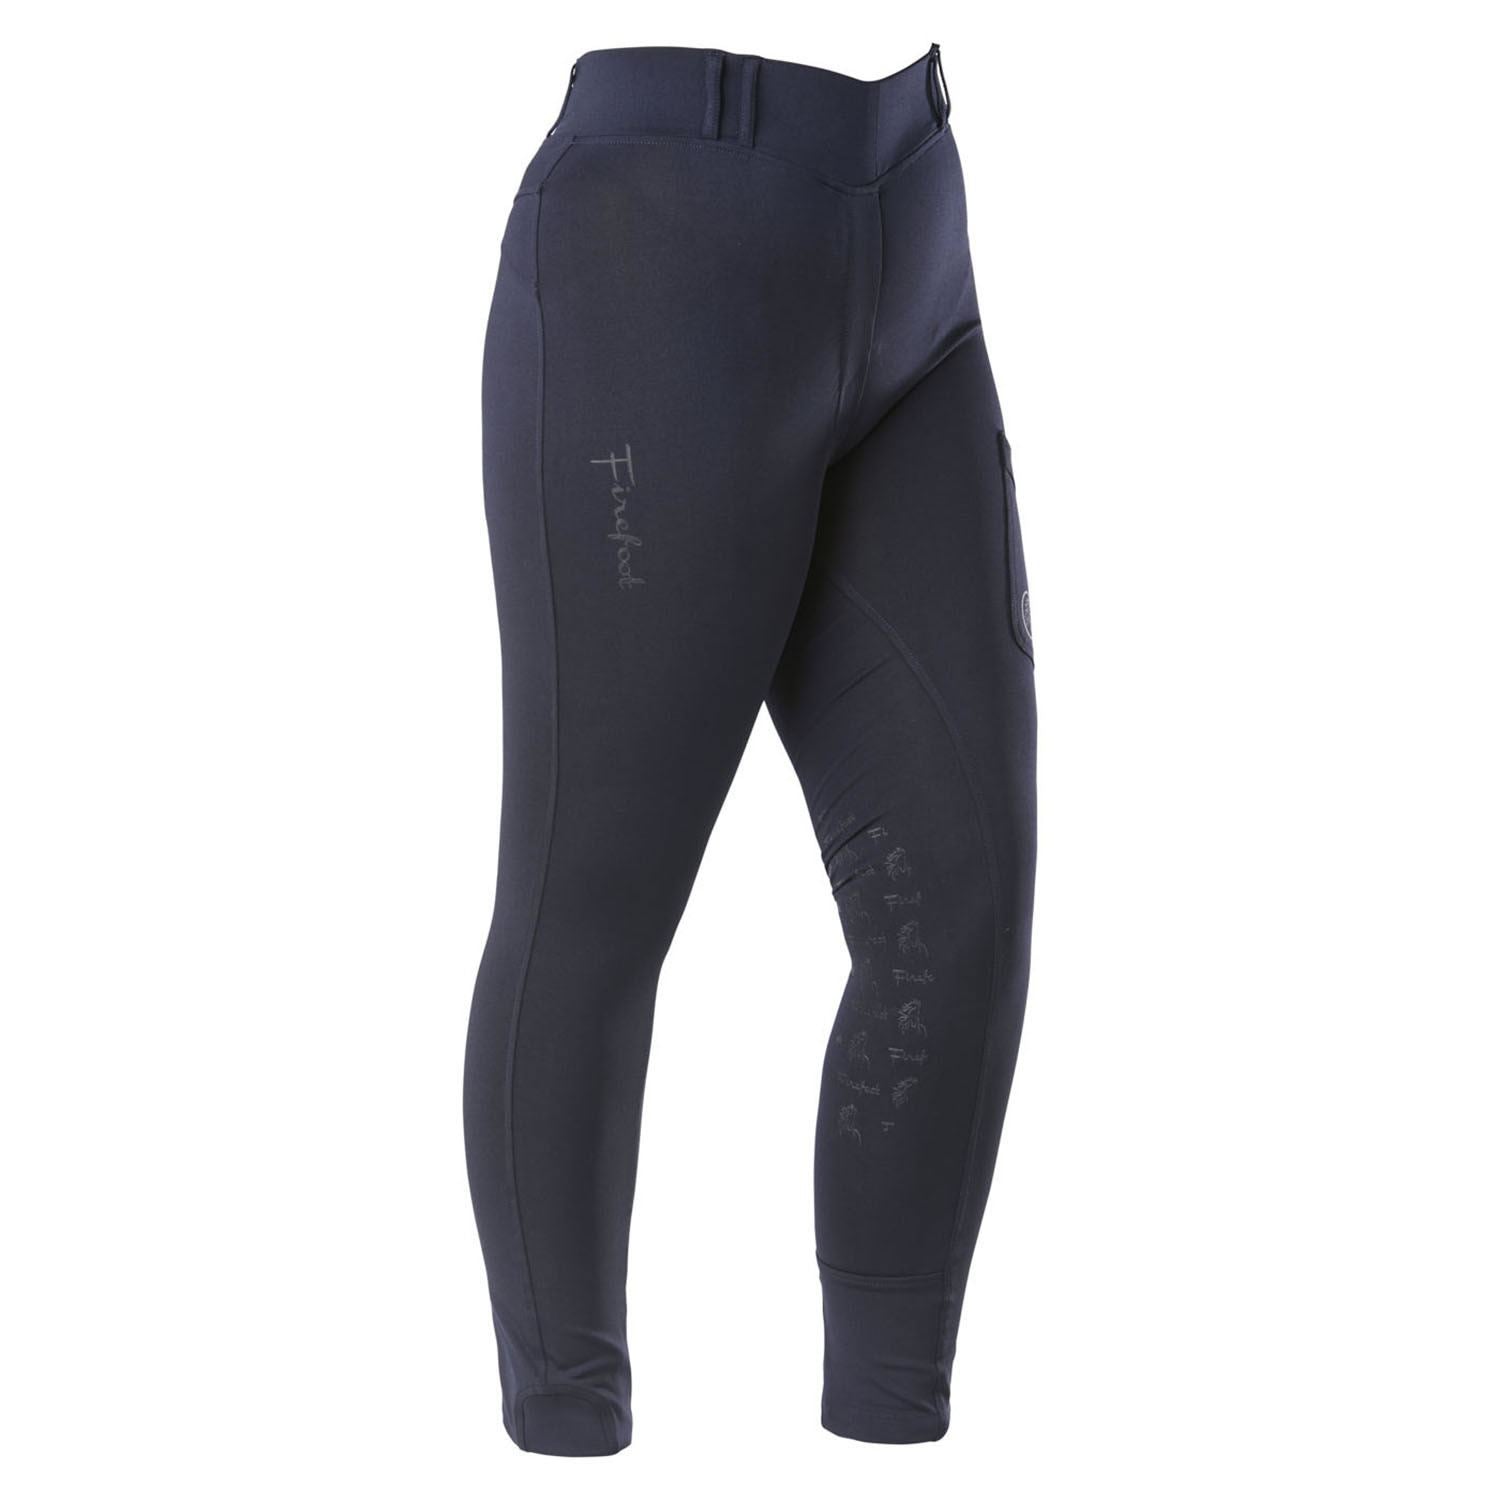 Firefoot Bankfield Basic Breeches Ladies Plain - Just Horse Riders